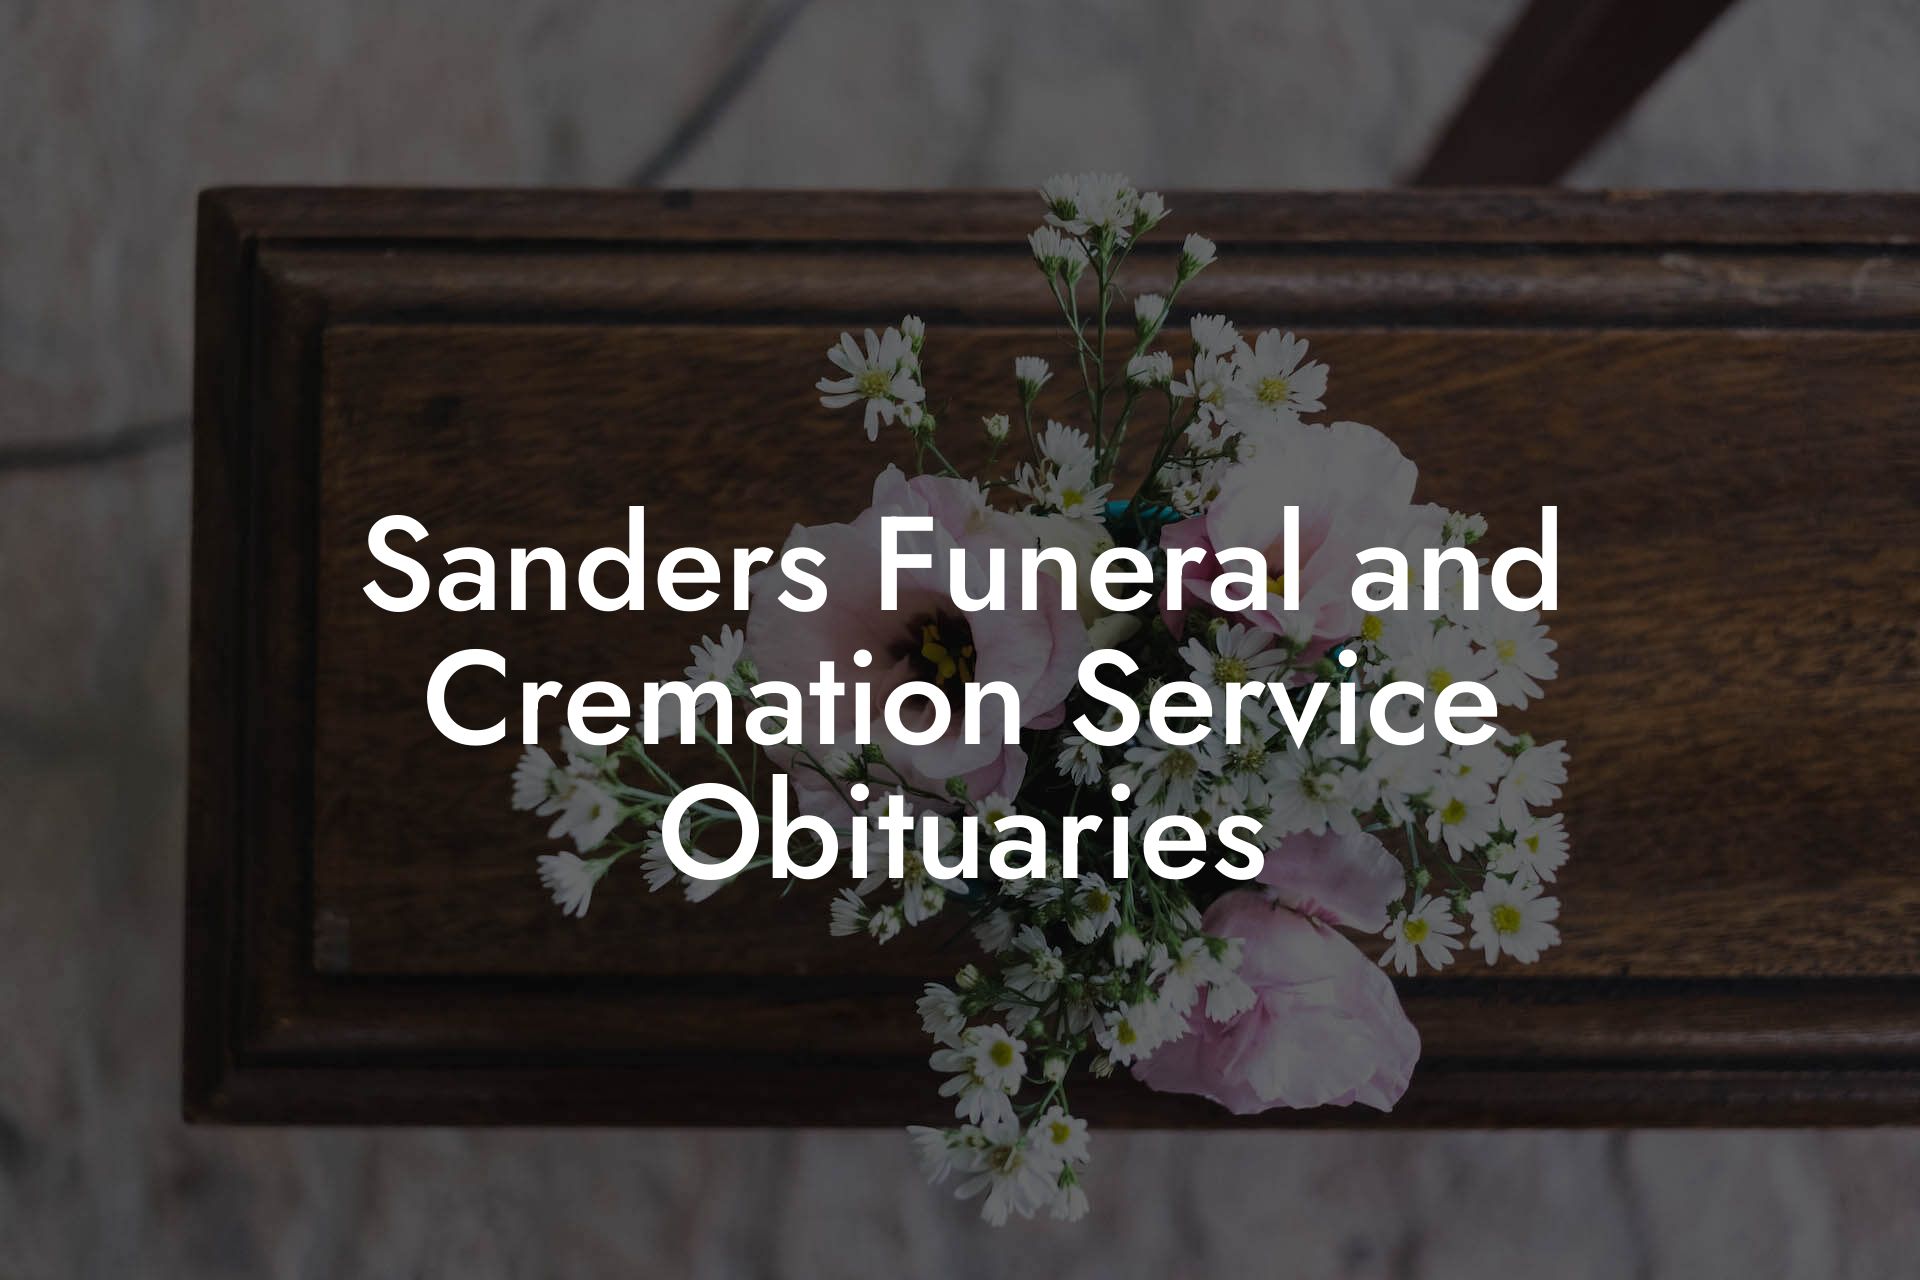 Sanders Funeral and Cremation Service Obituaries